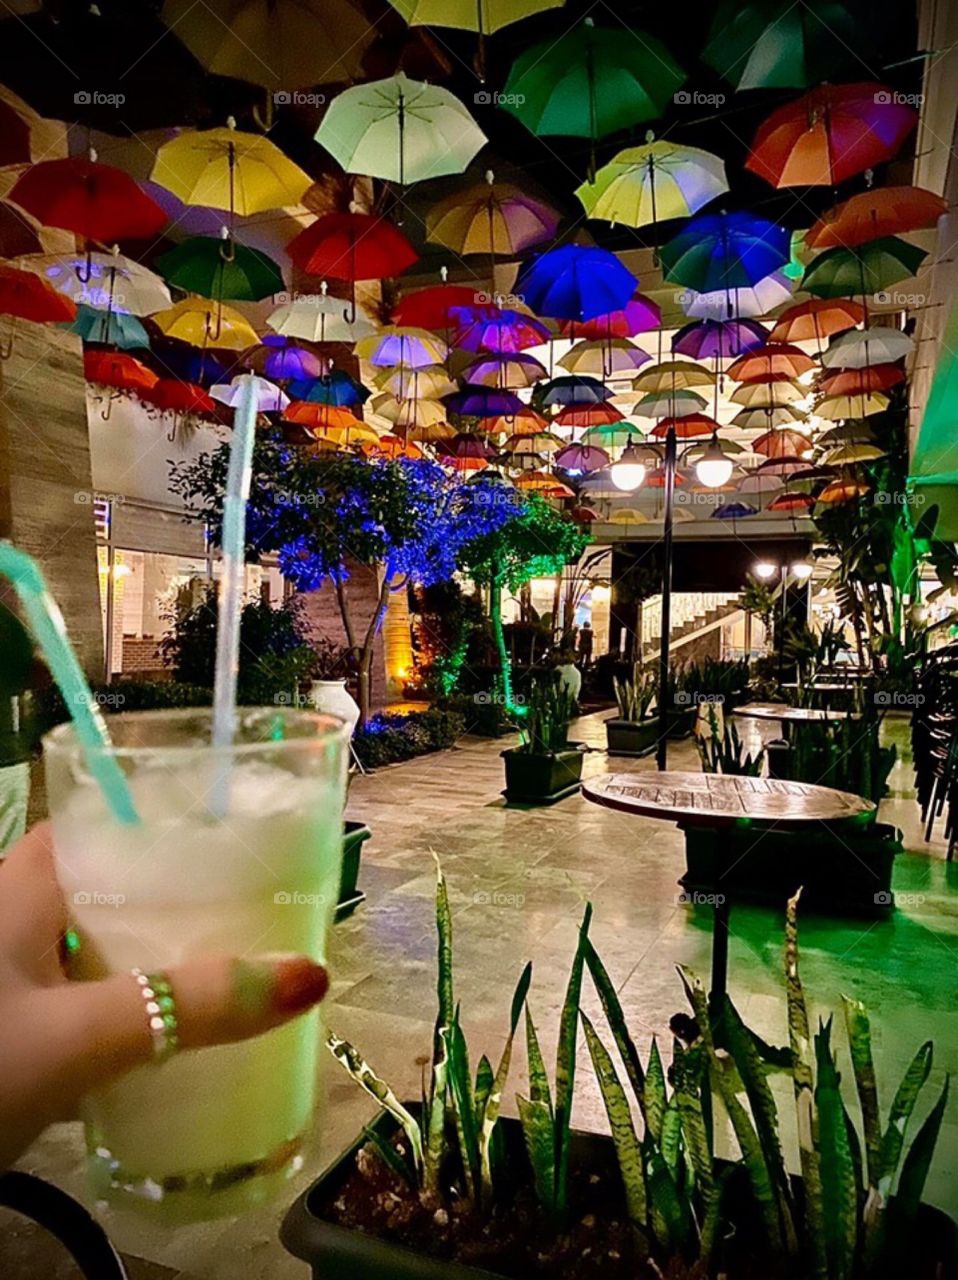 Drink to the Colourful umbrellas 